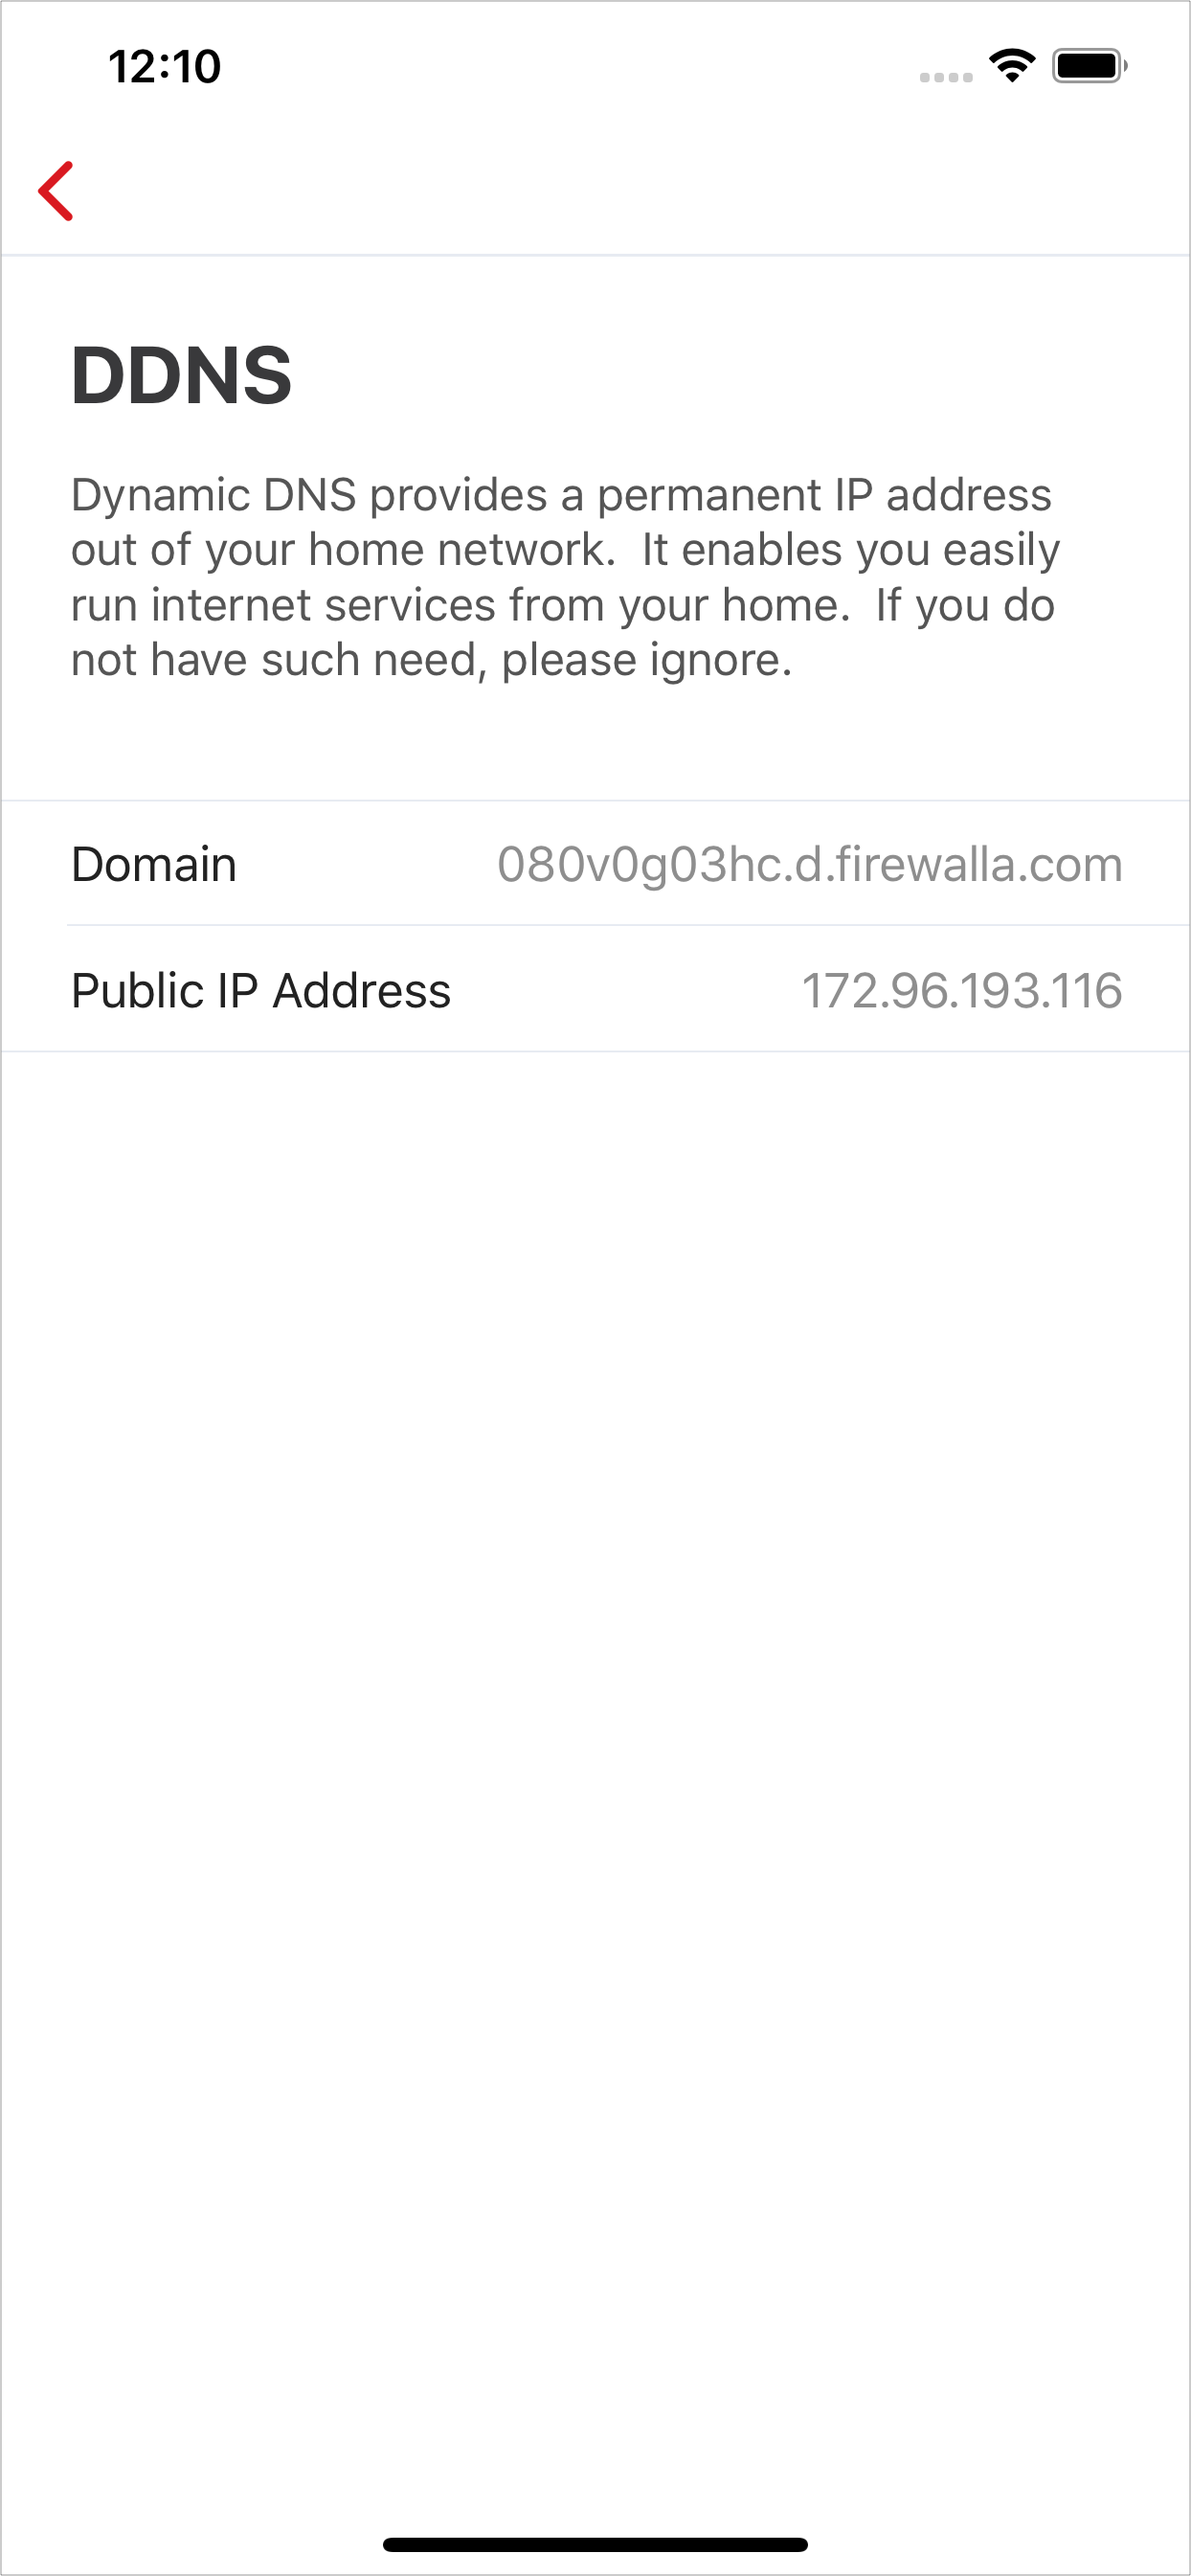 Firewalla DDNS feature with Domain and Public IP Address